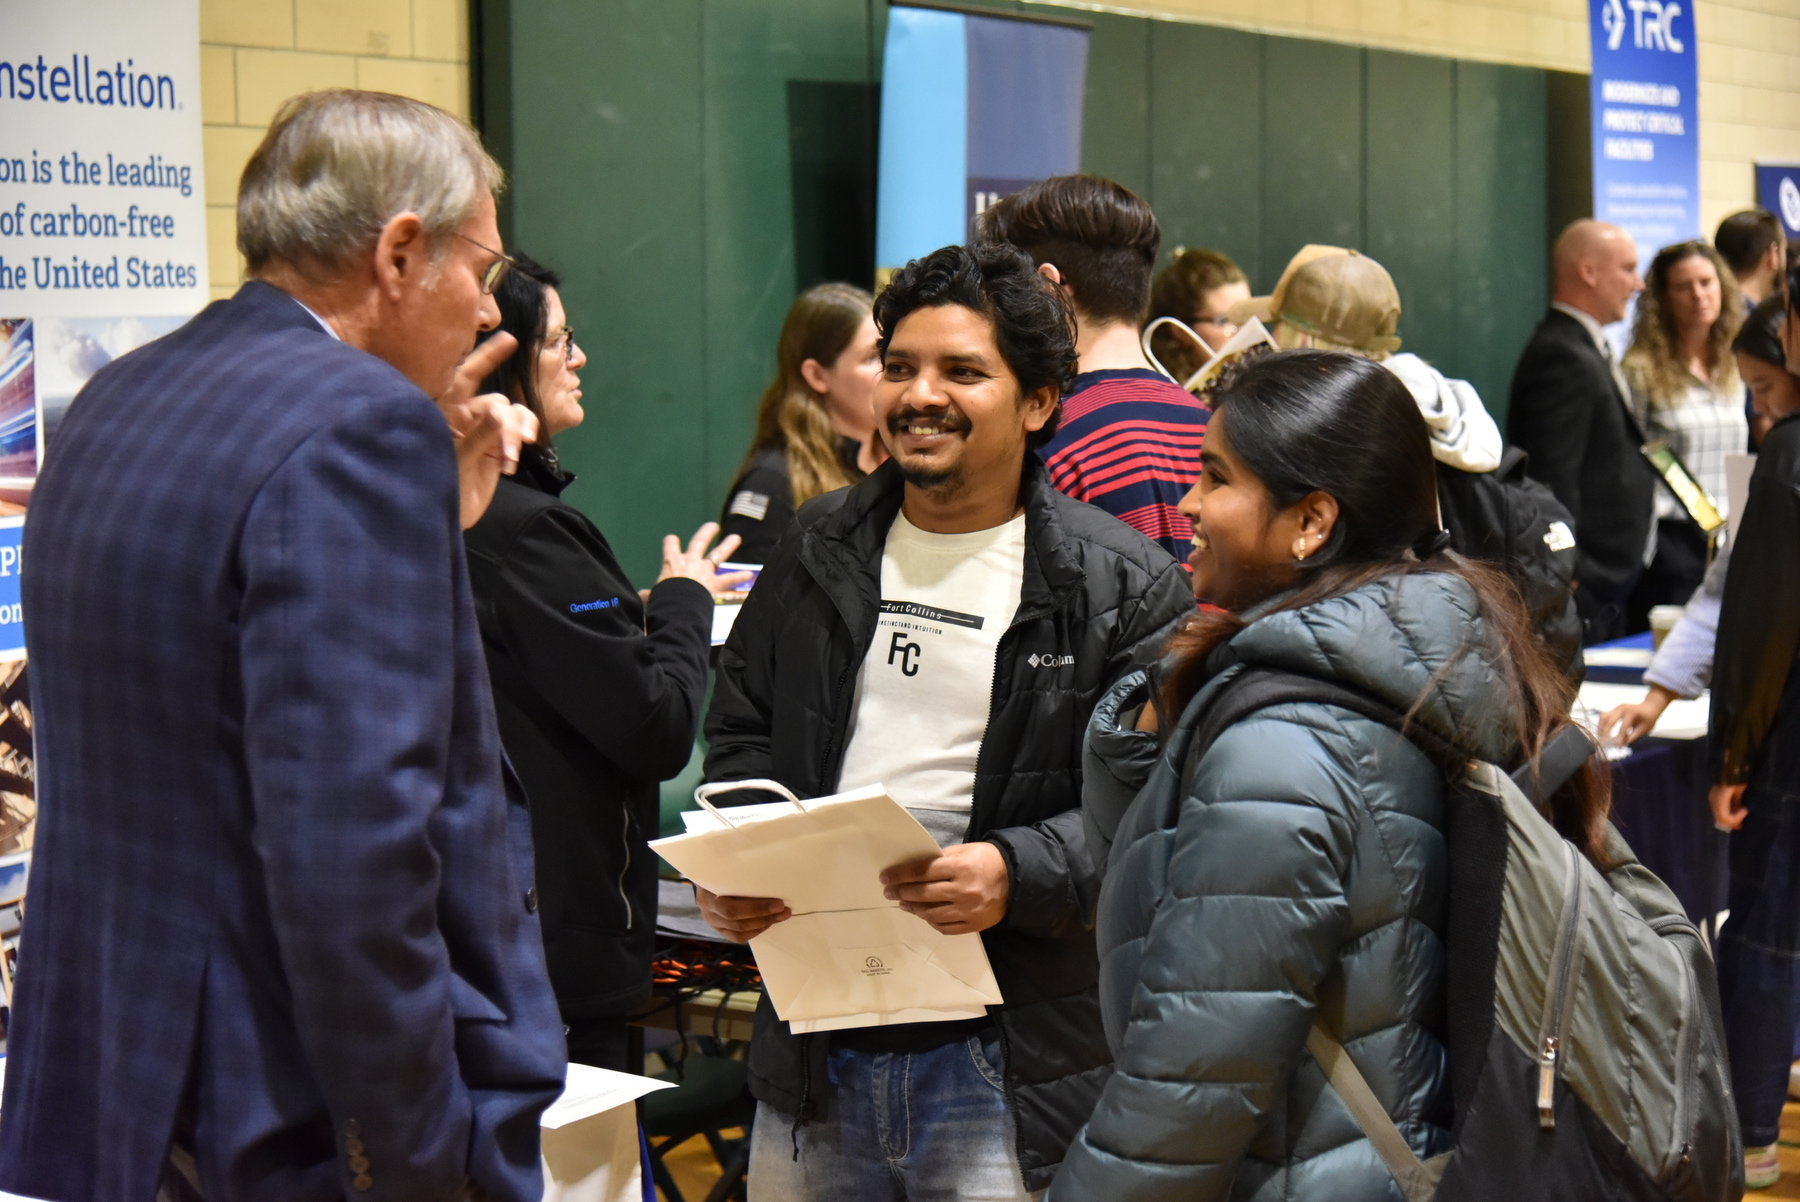 Oswego students took advantage of the opportunity to network with 100+ employers at the Fall 2023 Career and Internship Fair. The Oct. 18 event was hosted by Career Services and held in the Swetman Gym in the Marano Campus Center. Pictured, graduate students in the biomedical field Jasmitha Pilli and Babu Rajendraprasad Tadigiri talk with Dave Mankiewiez from Centerstate CEO/Corporation for Economic Opportunities.